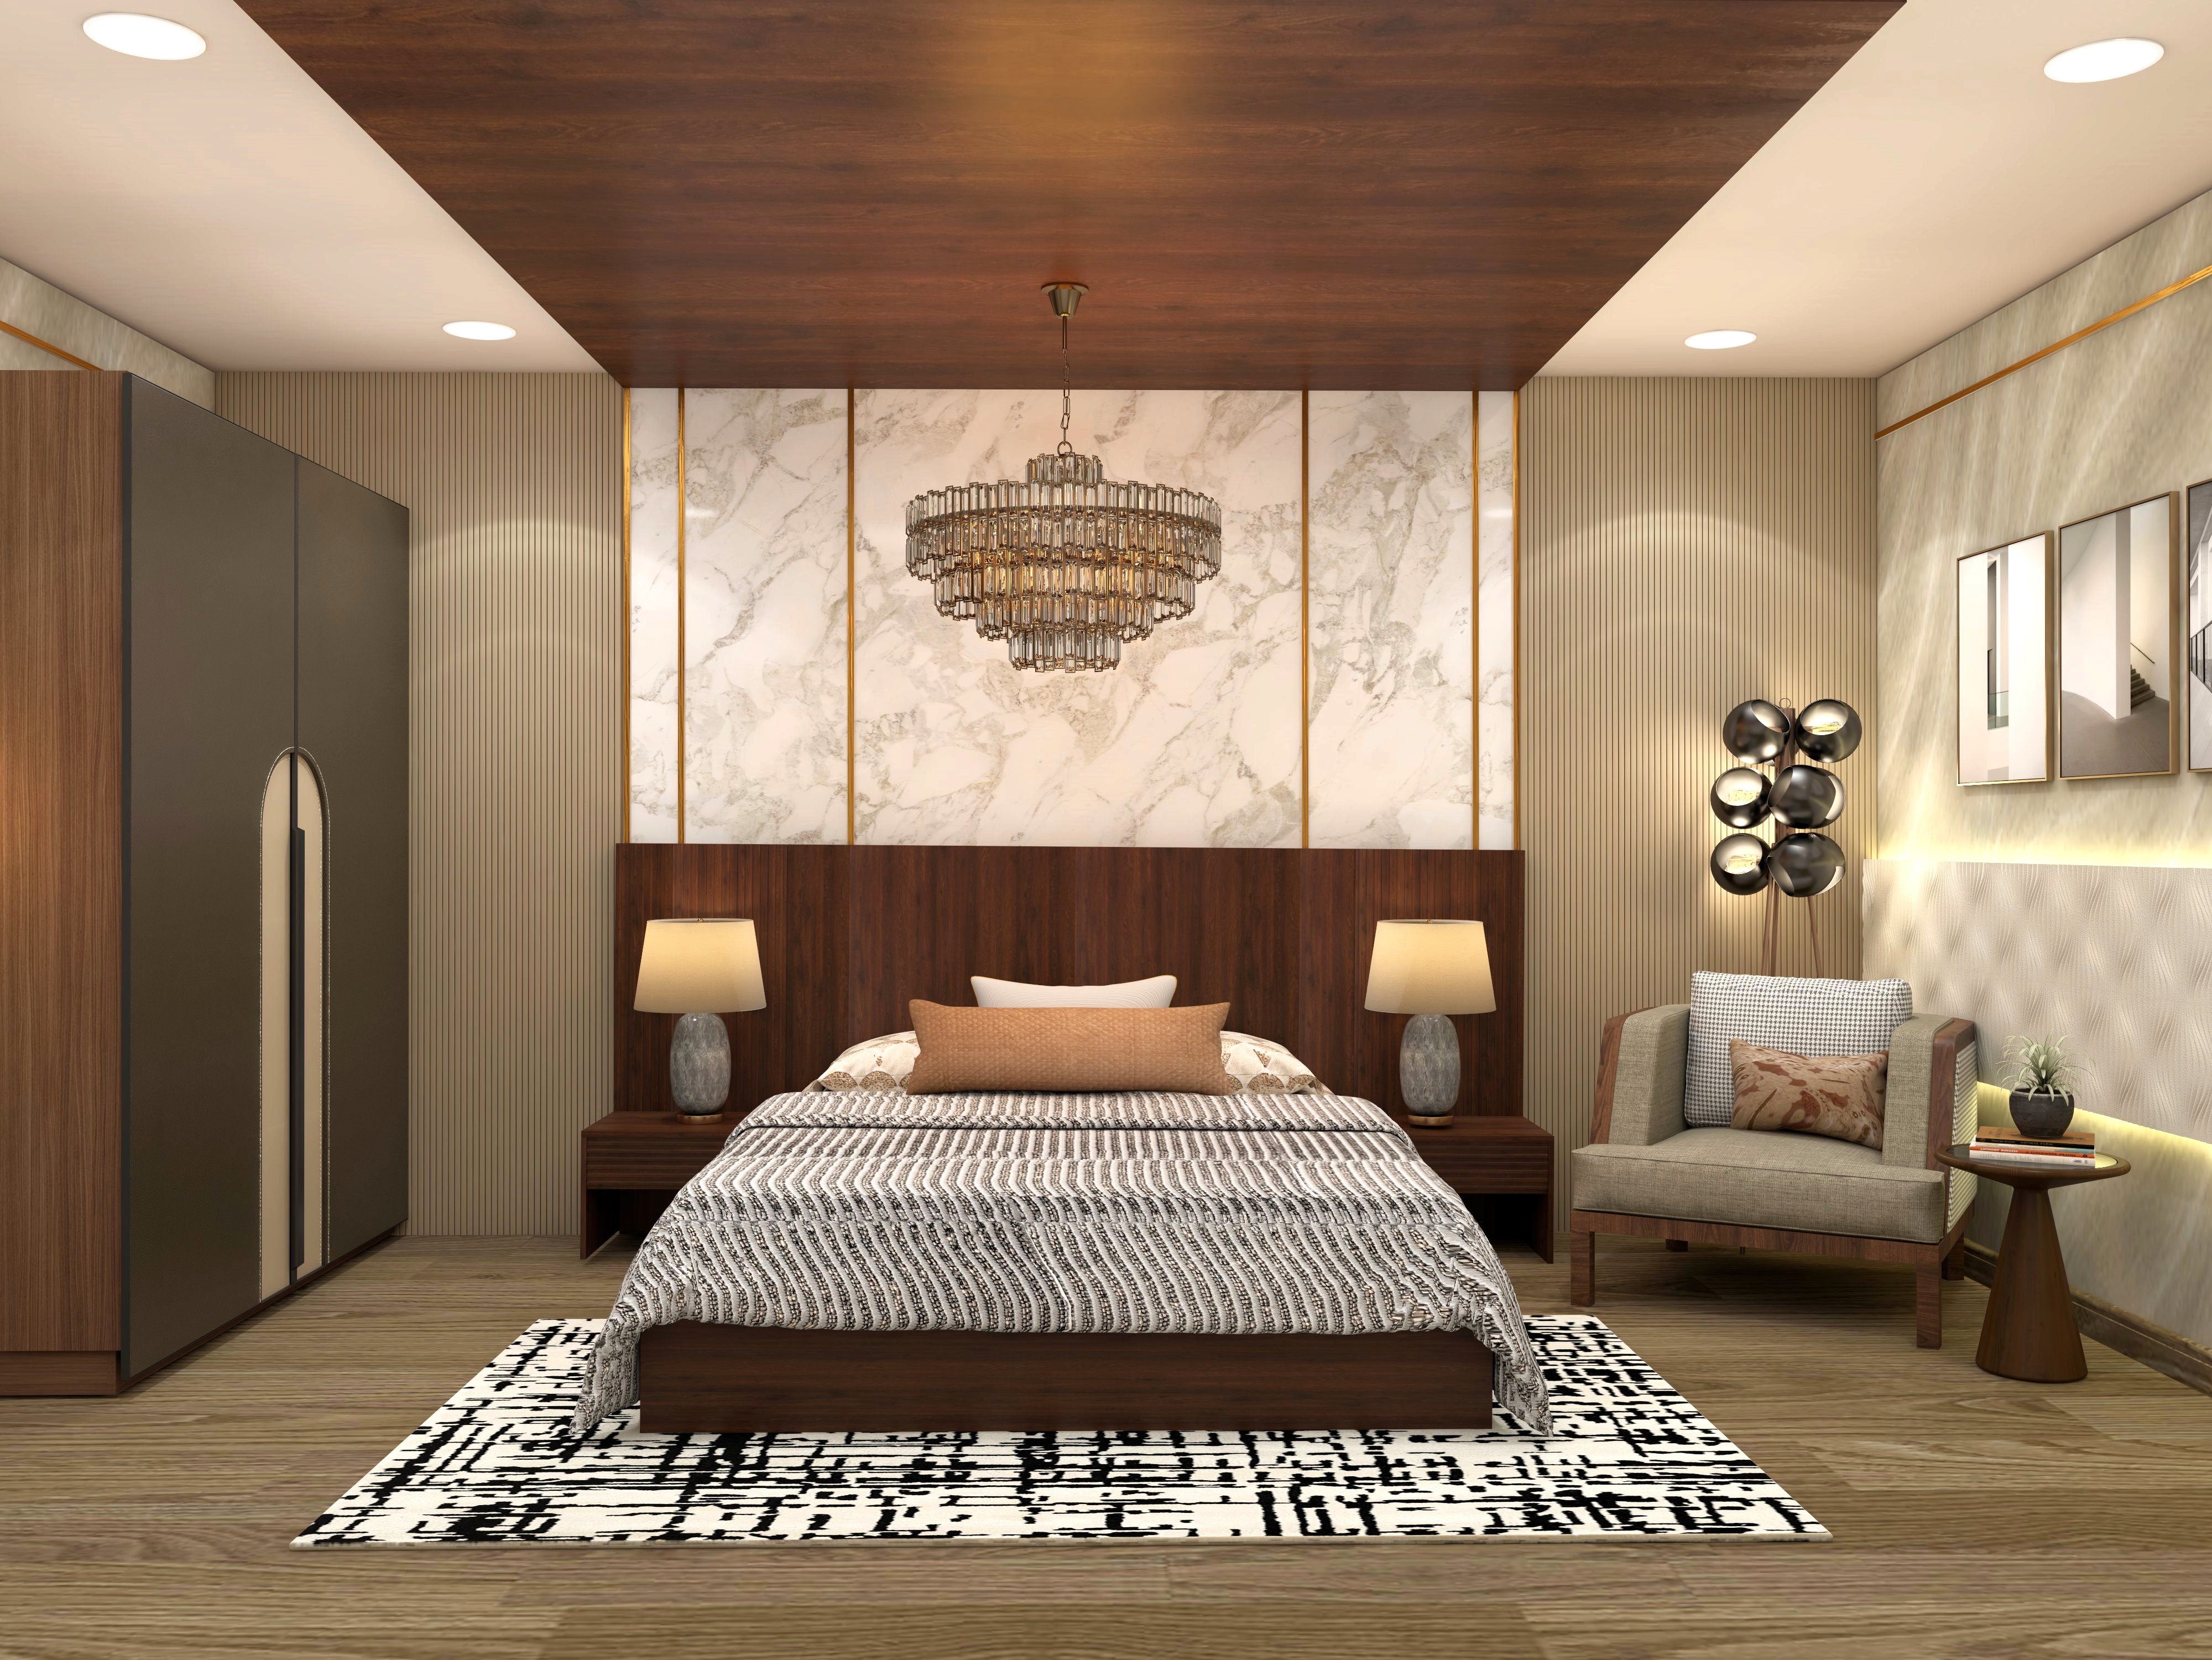 Bedroom with fluted wall paneling and wooden headboard-Beautiful Homes